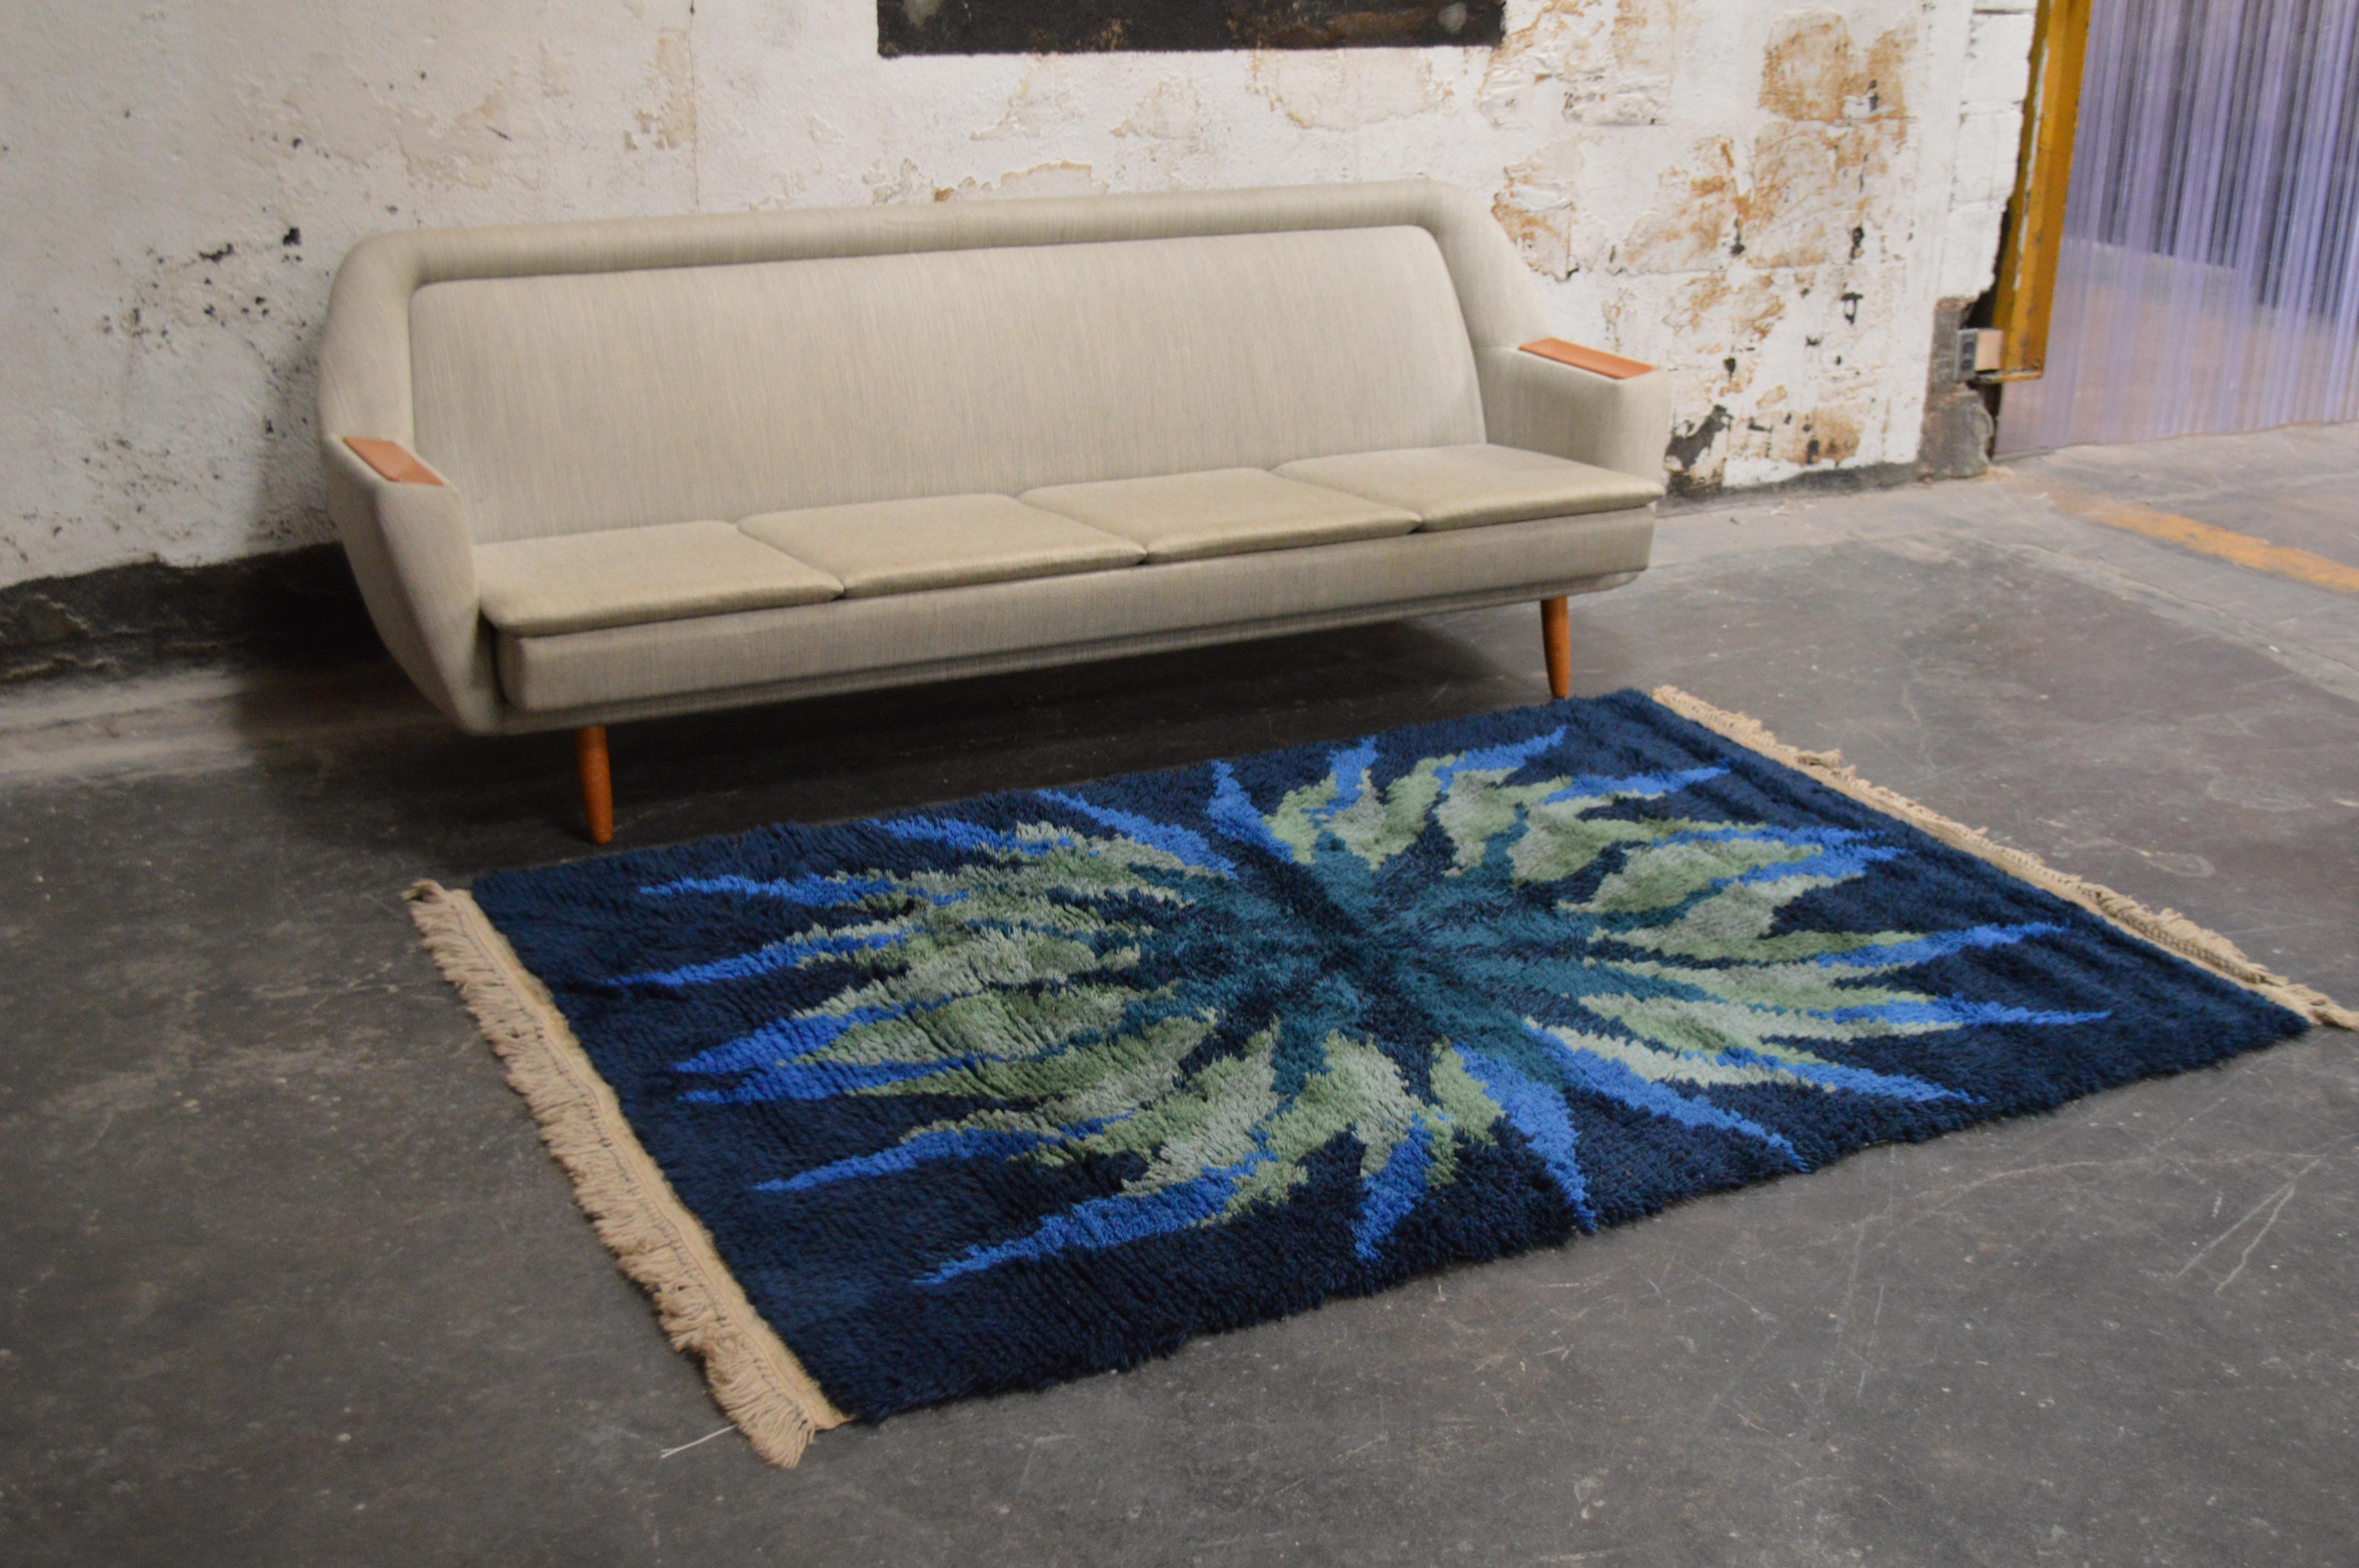 Vintage Scandinavian Rya rug with a unique and intriguing vintage design - a vintage Rya rug that was woven in Scandinavia during the 1960s. Boasting a fascinating color pallet and a compelling design, this rug is bold yet versatile and will flow